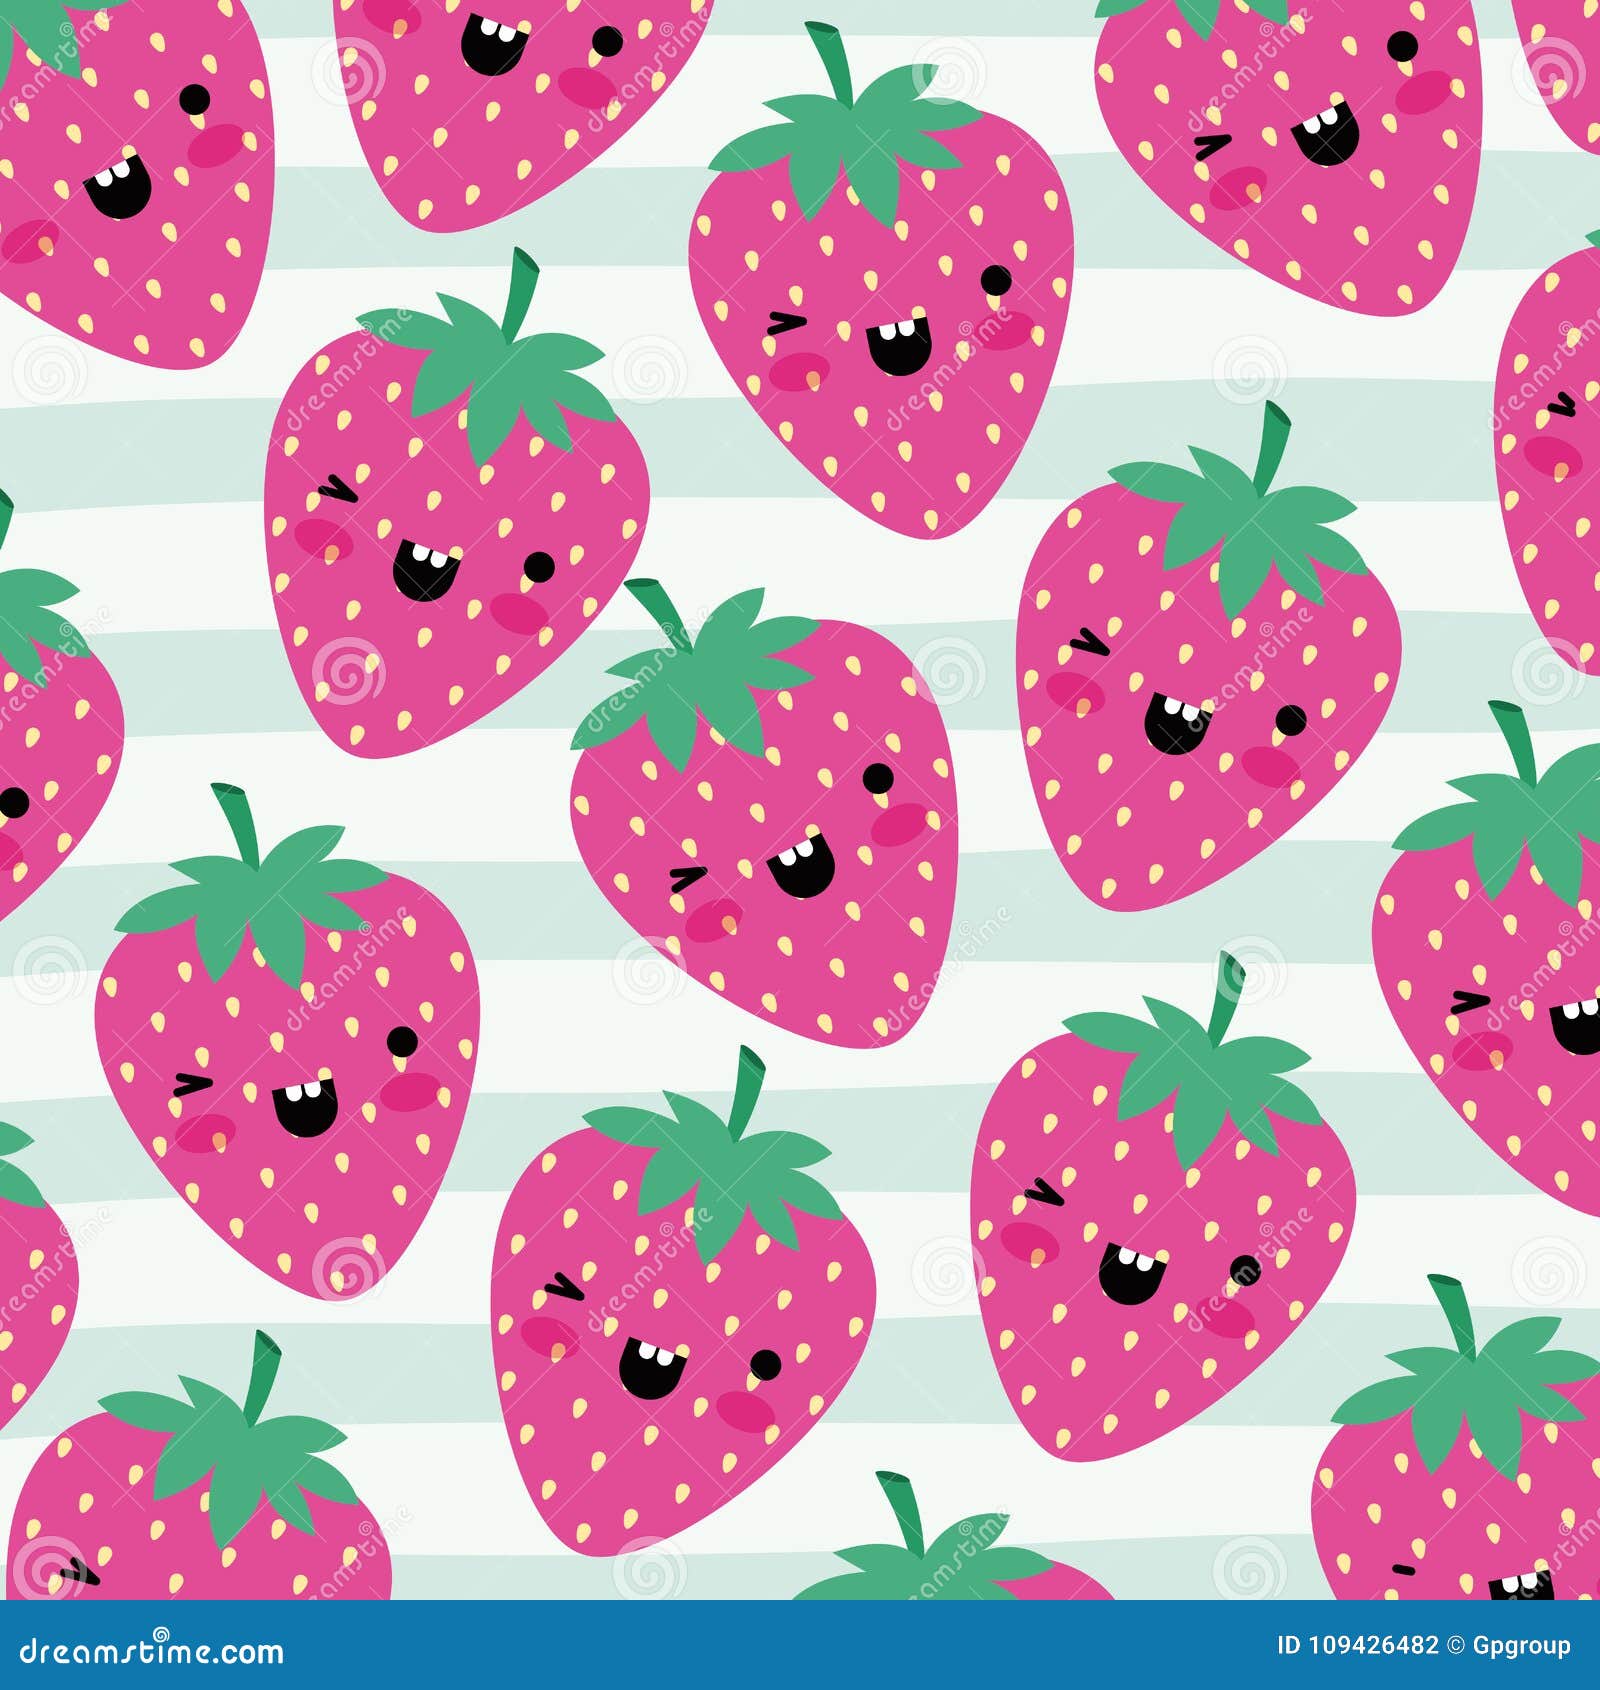 Strawberries Kawaii Fruits Pattern Set on Decorative Lines Color Background  Stock Vector - Illustration of cute, expression: 109426482